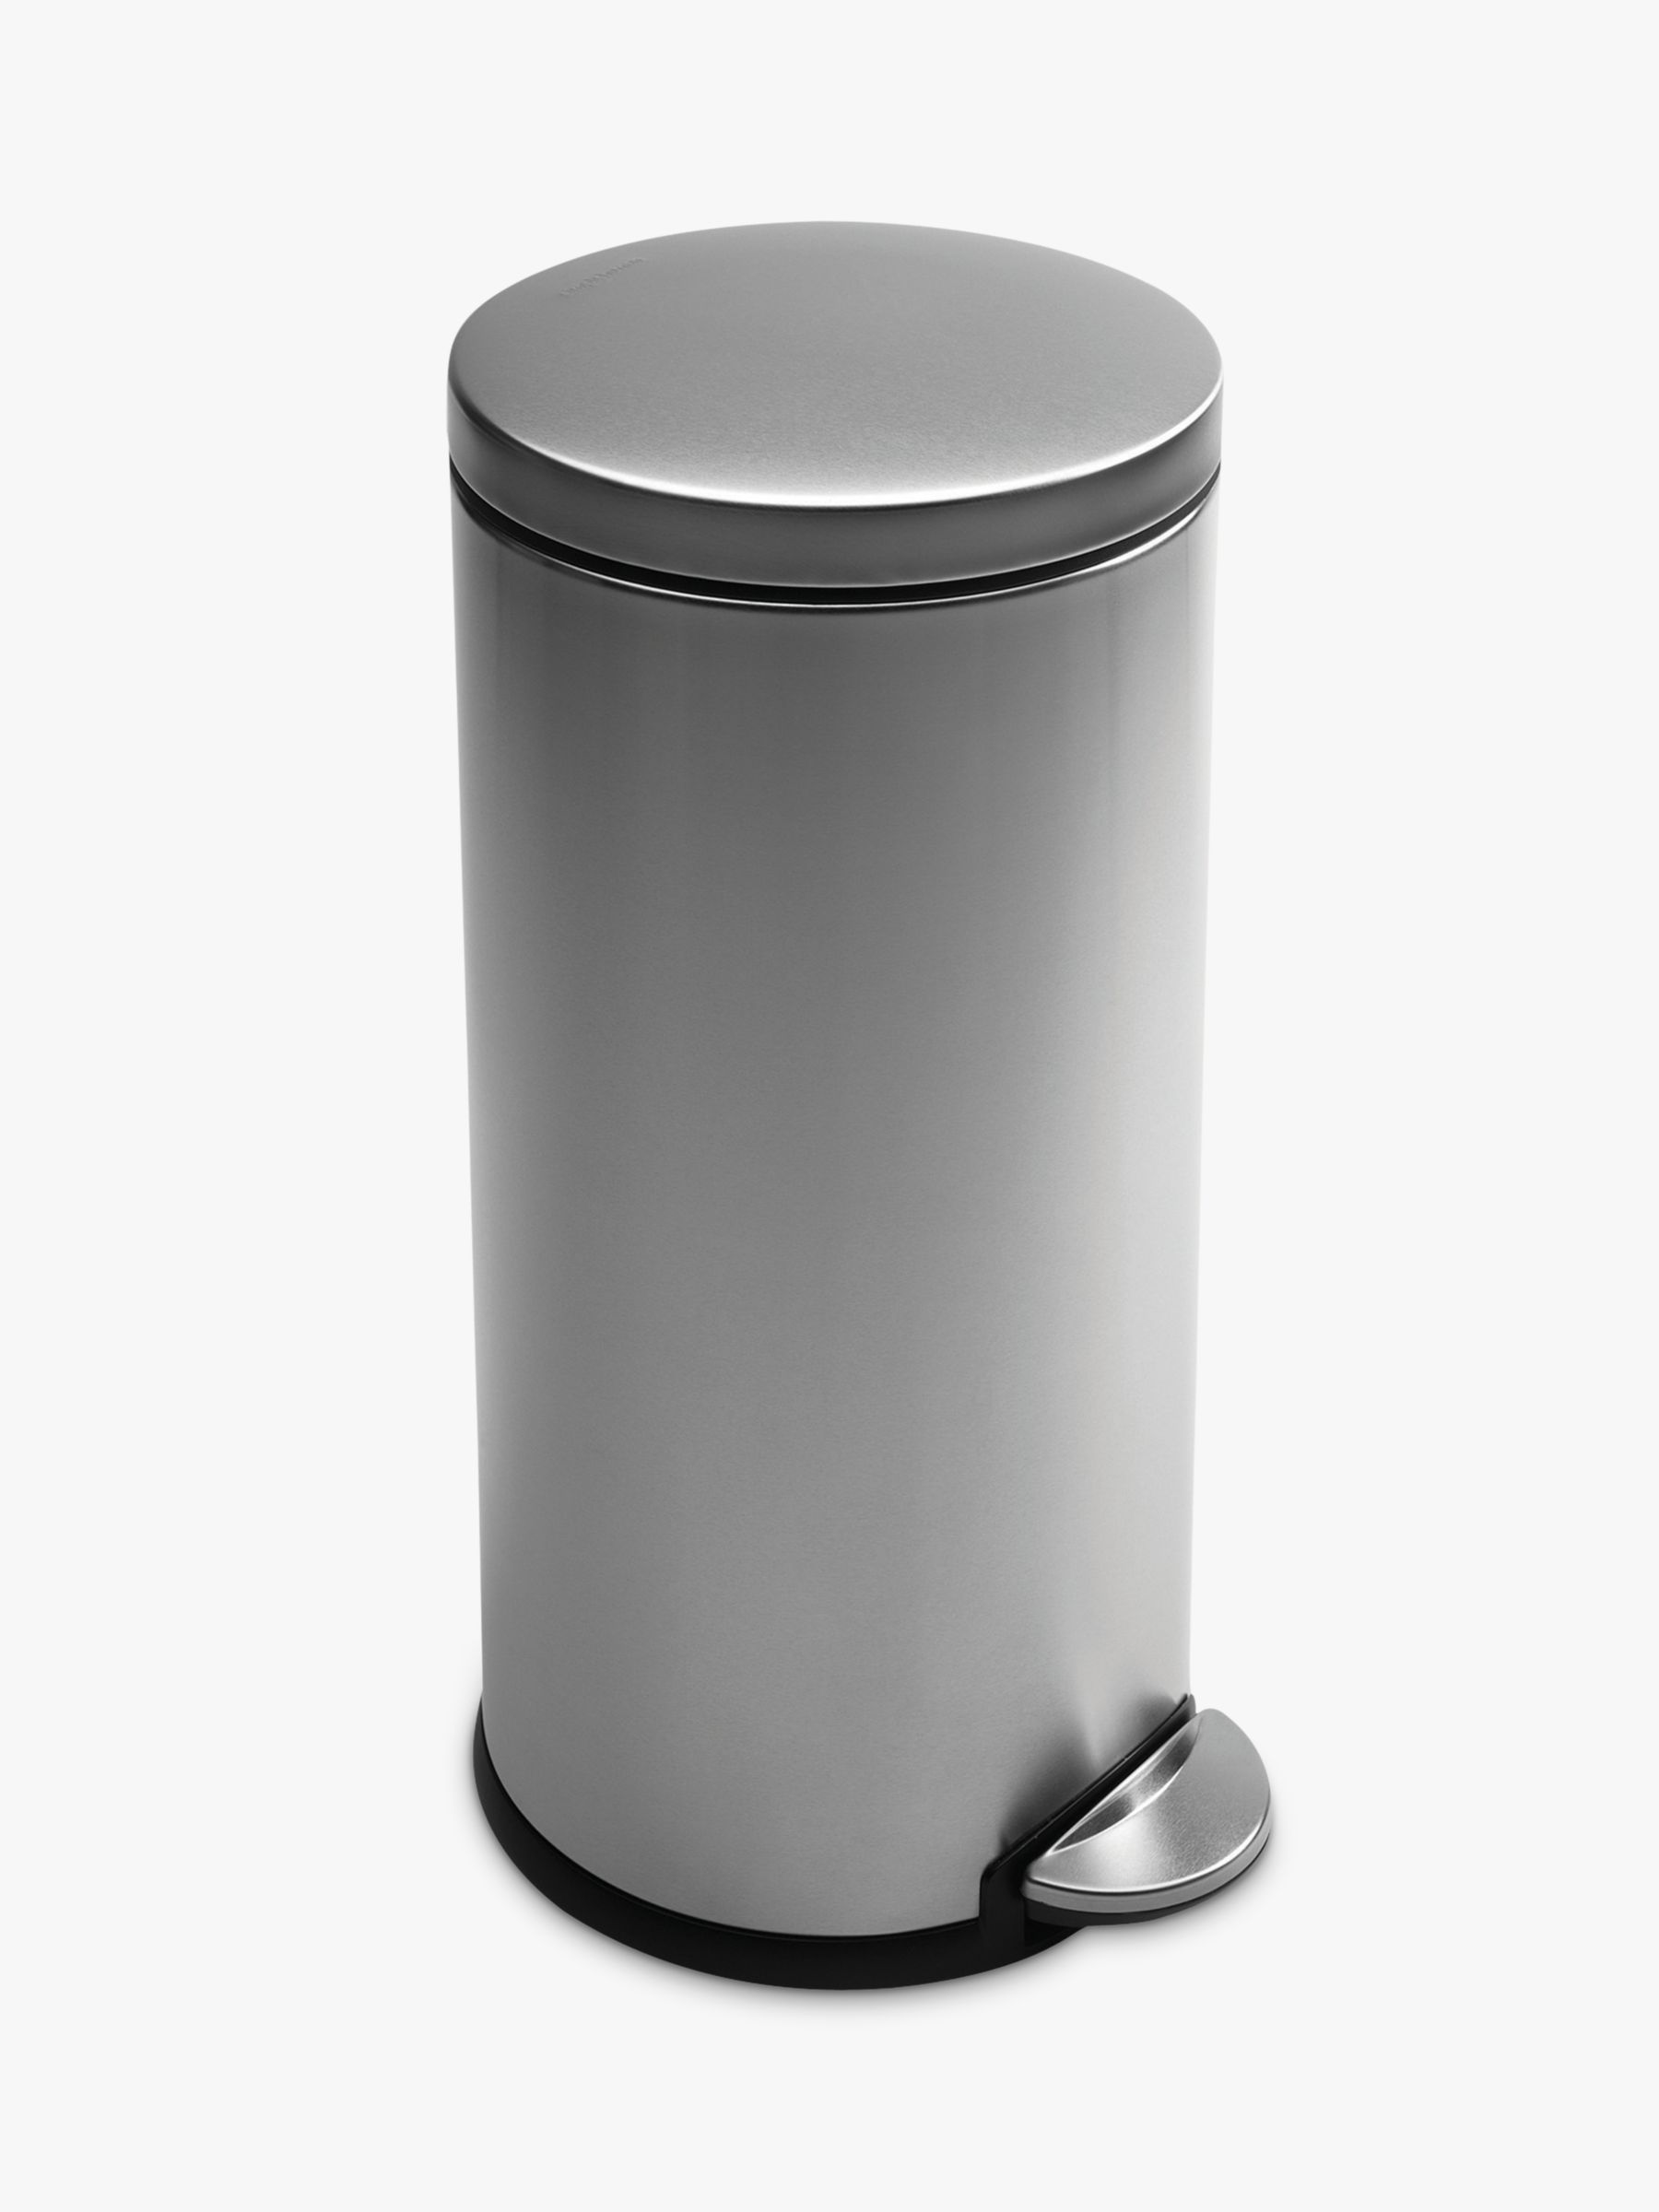 Deluxe Round Pedal Bin, Brushed